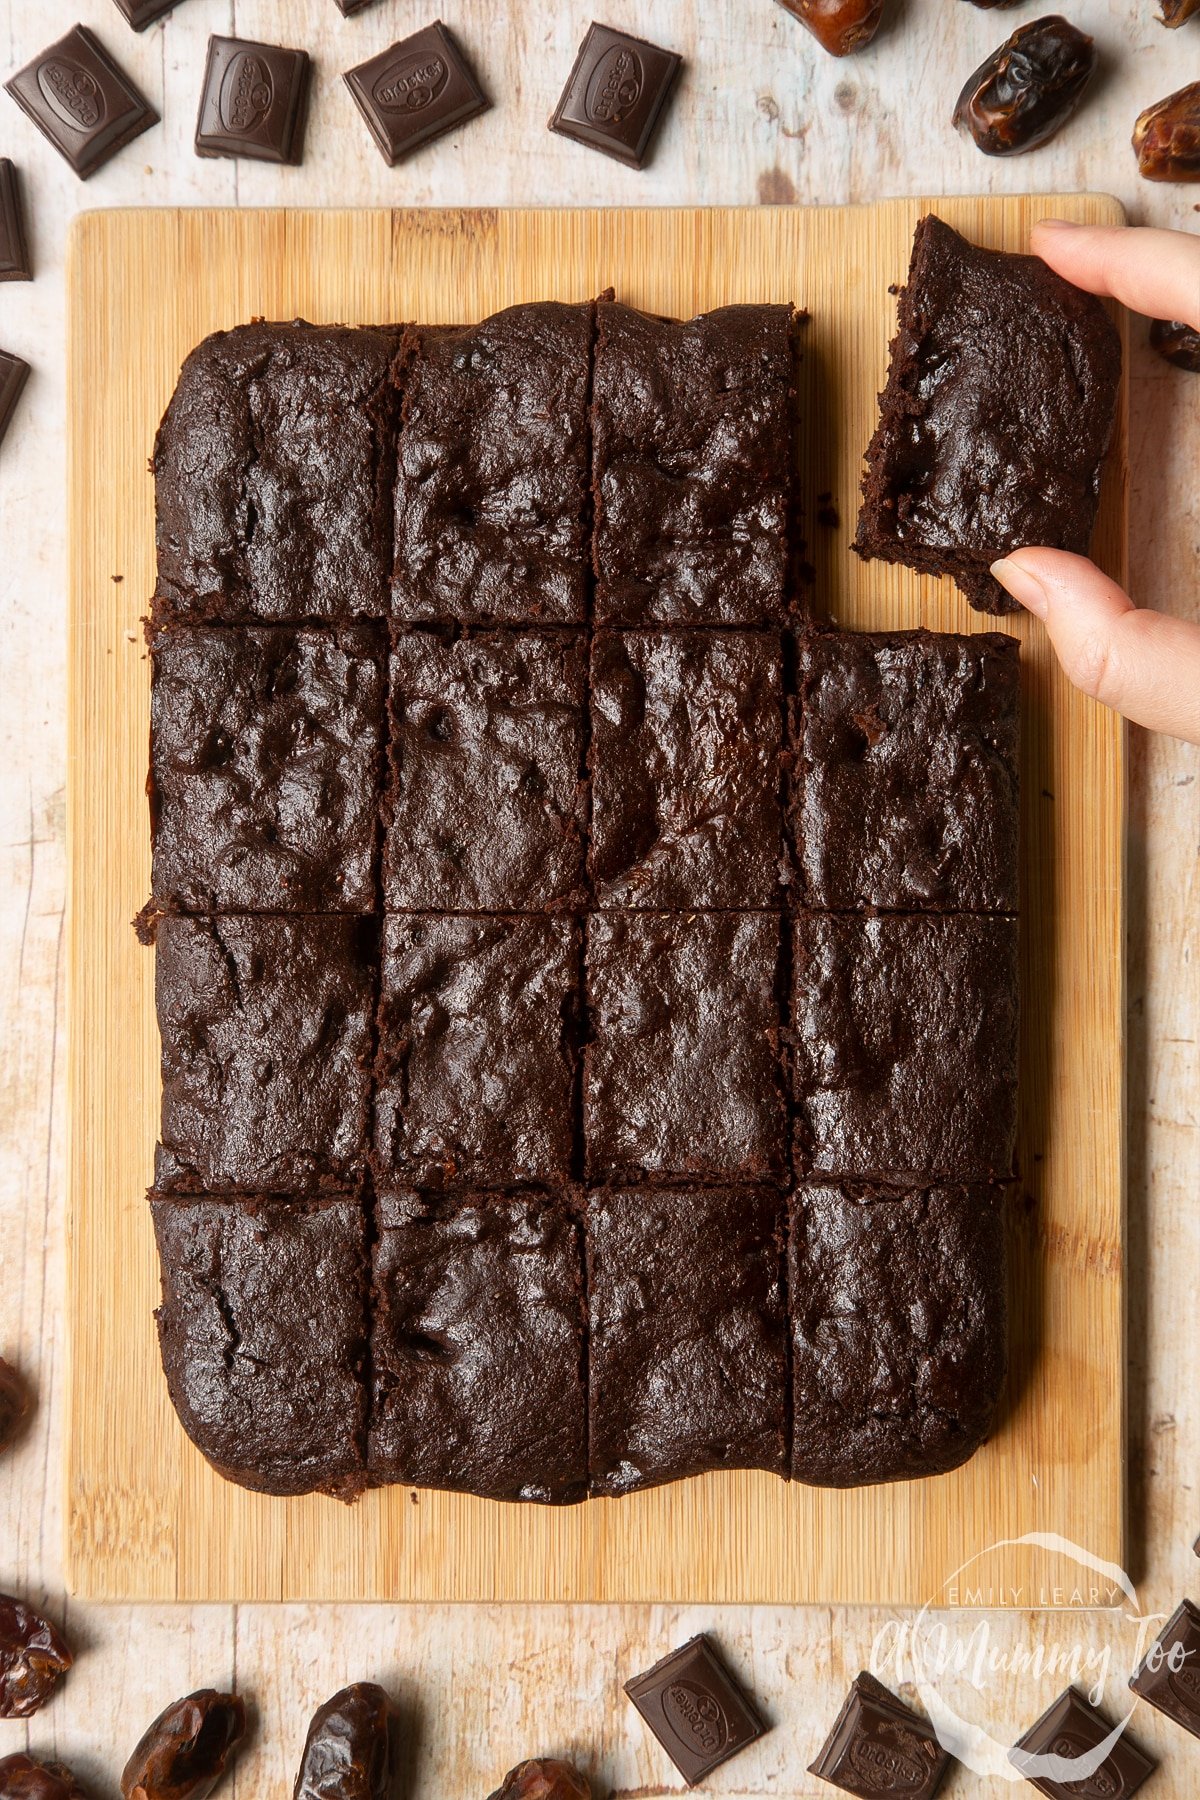 16 whole grain brownies made with dates and dark chocolate arranged on a pale wooden board. A hand reaches to take one.